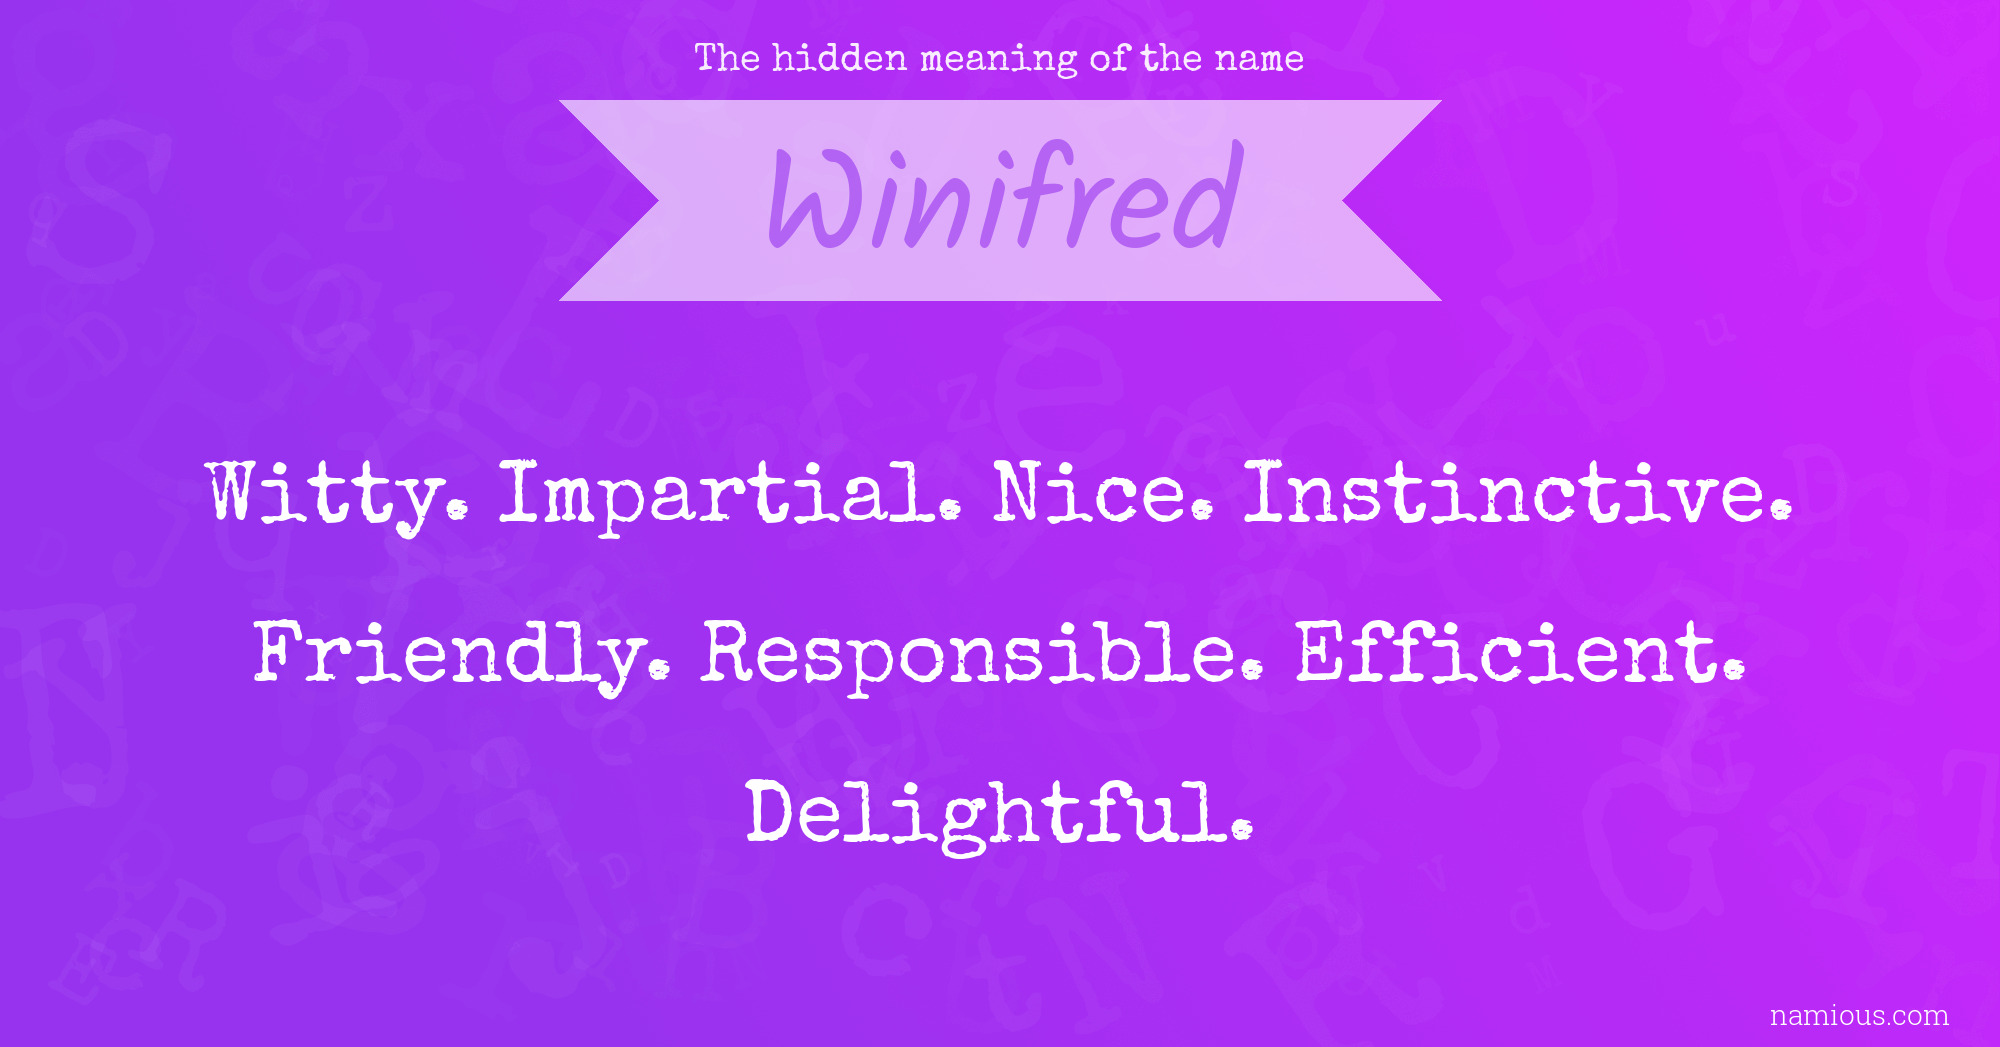 The hidden meaning of the name Winifred